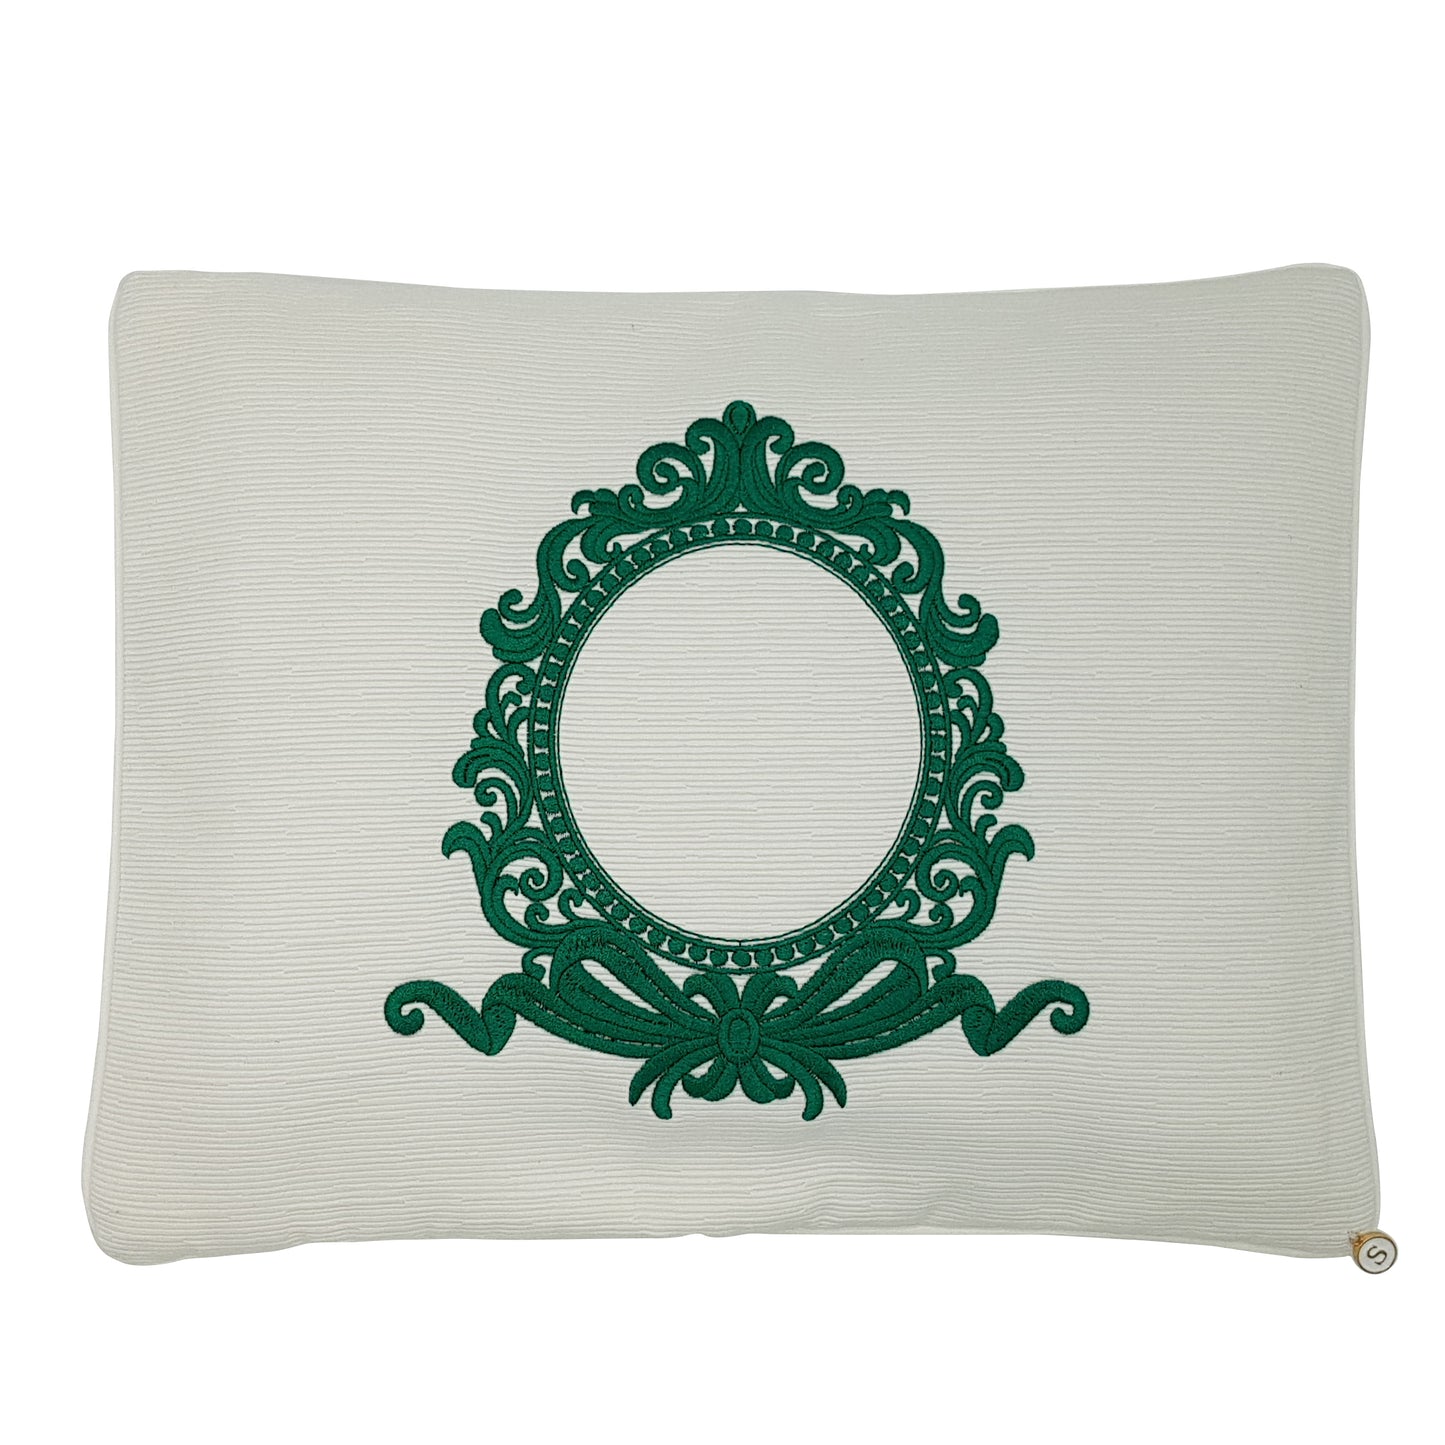 'Framed in Forest' Embroidered Pillowcase